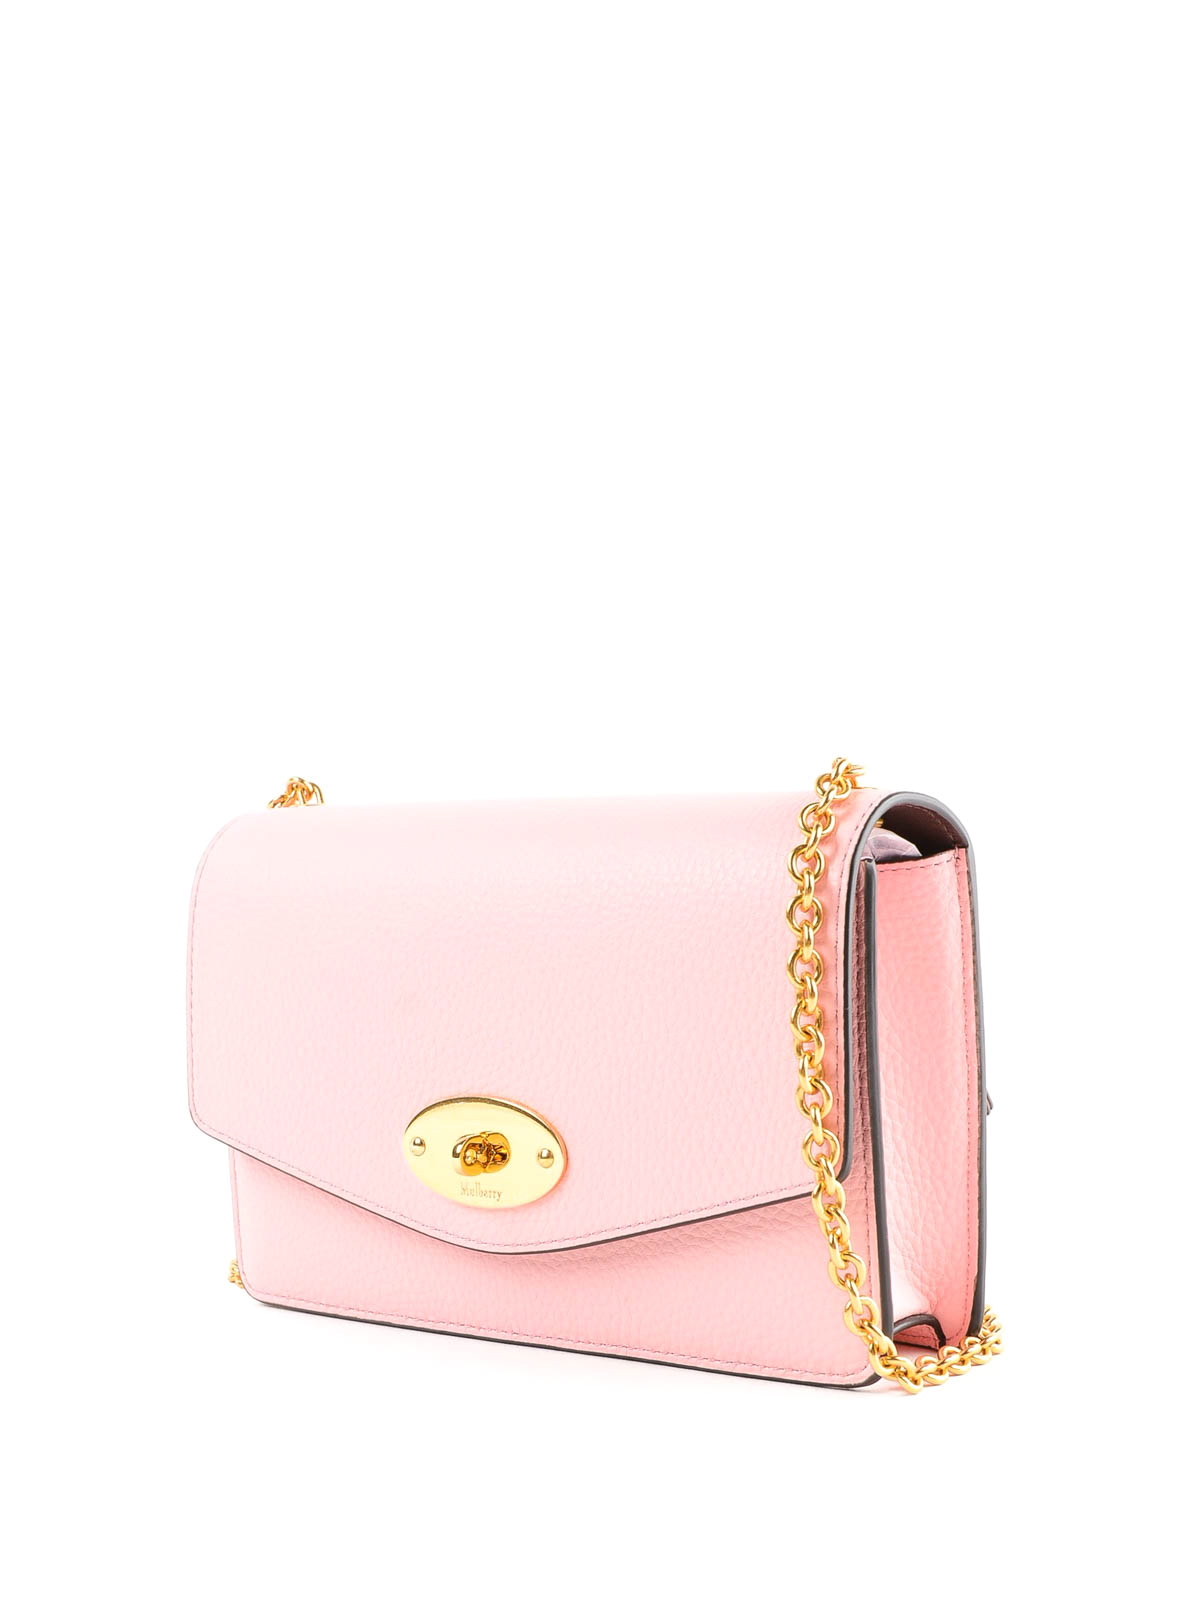 Cross body bags Mulberry - Small Darley sorbet pink leather bag